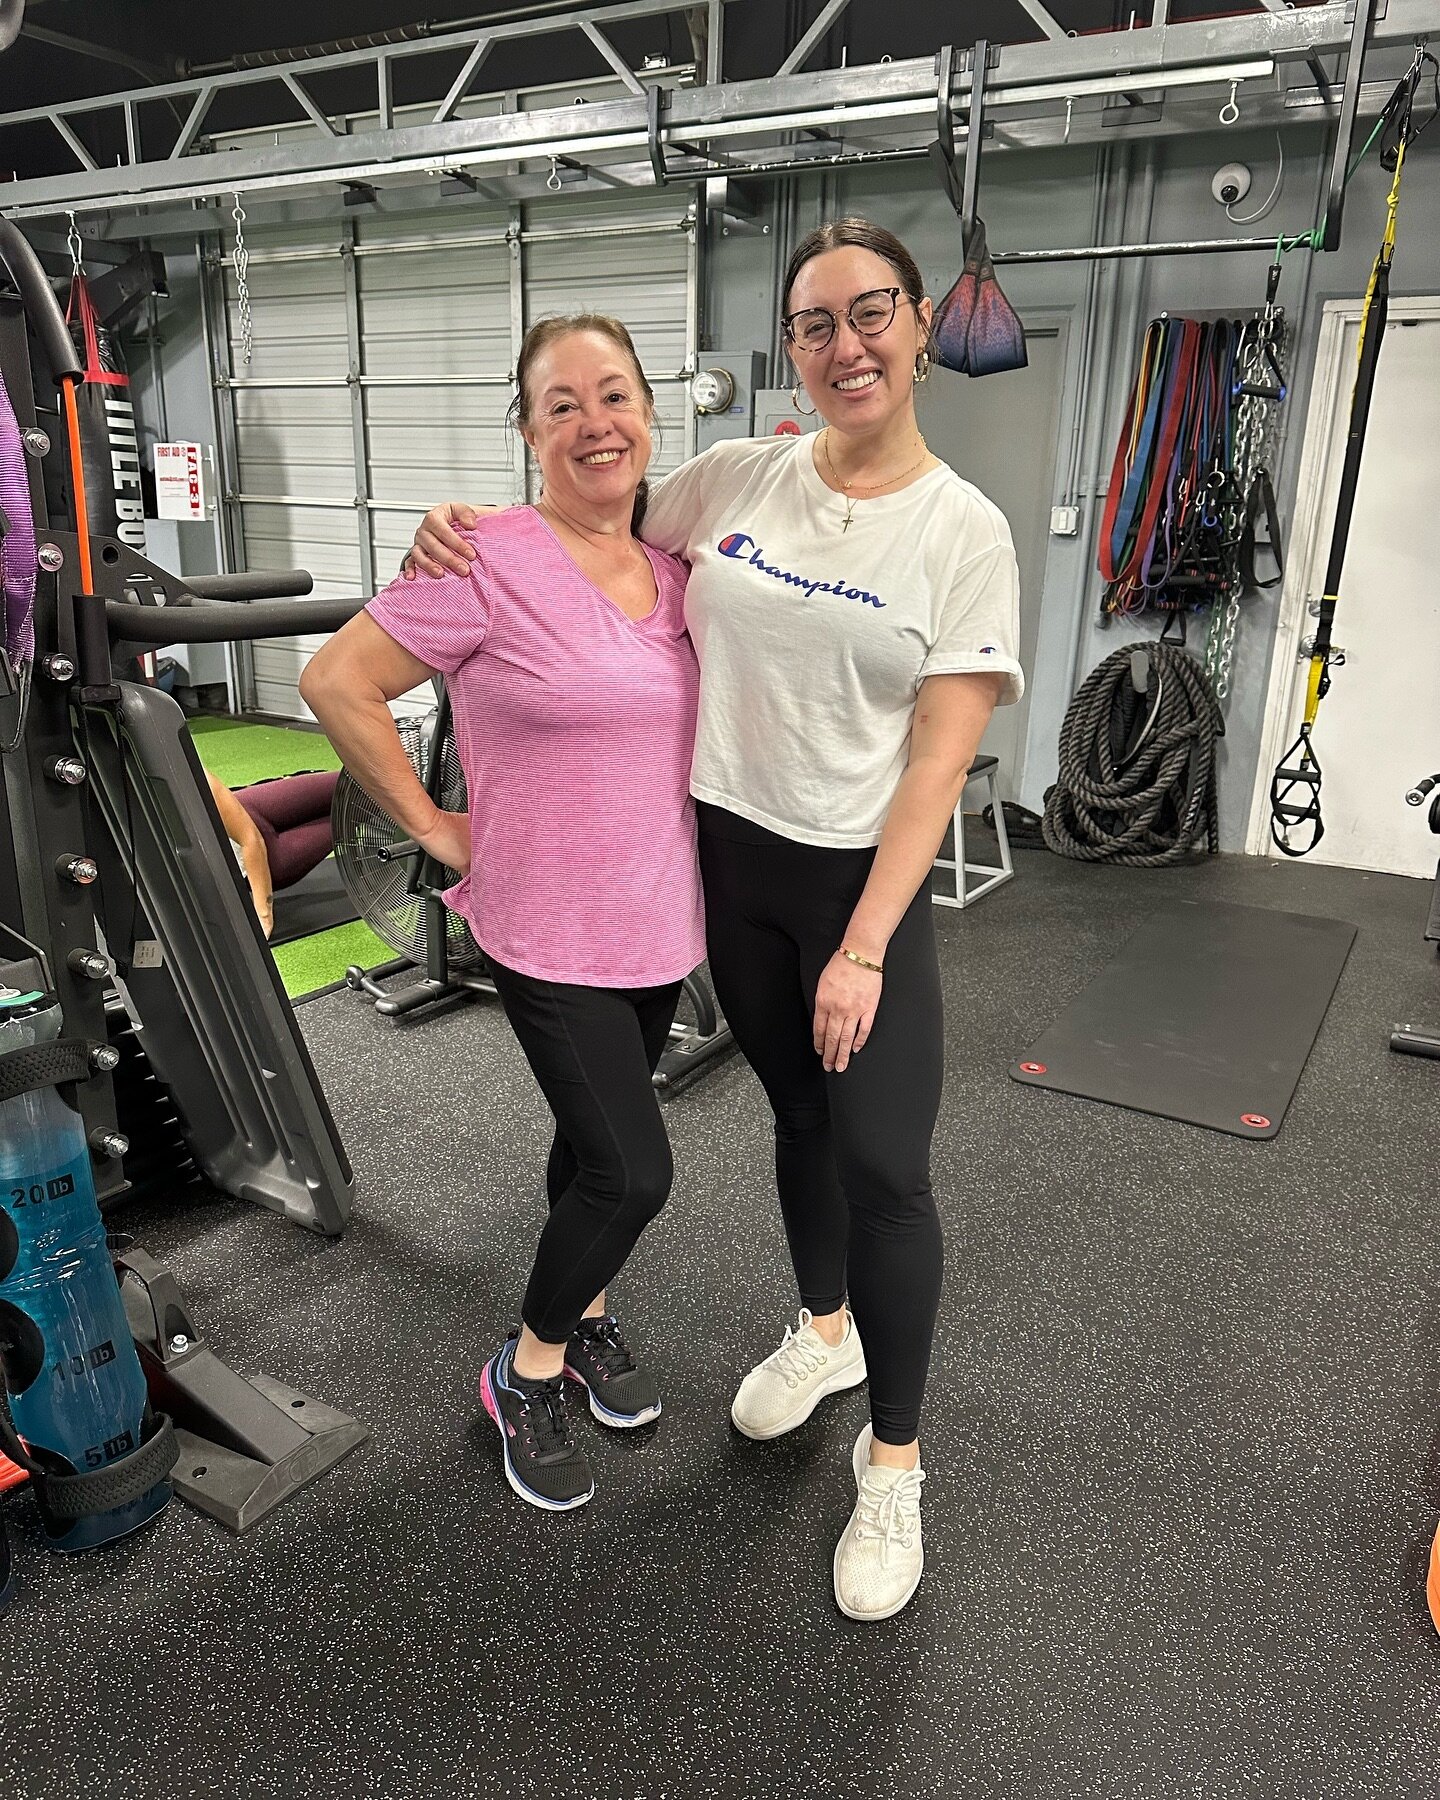 Mother &amp; Daughter workout duo! 👯&zwj;♀️ The best kind of buddy!